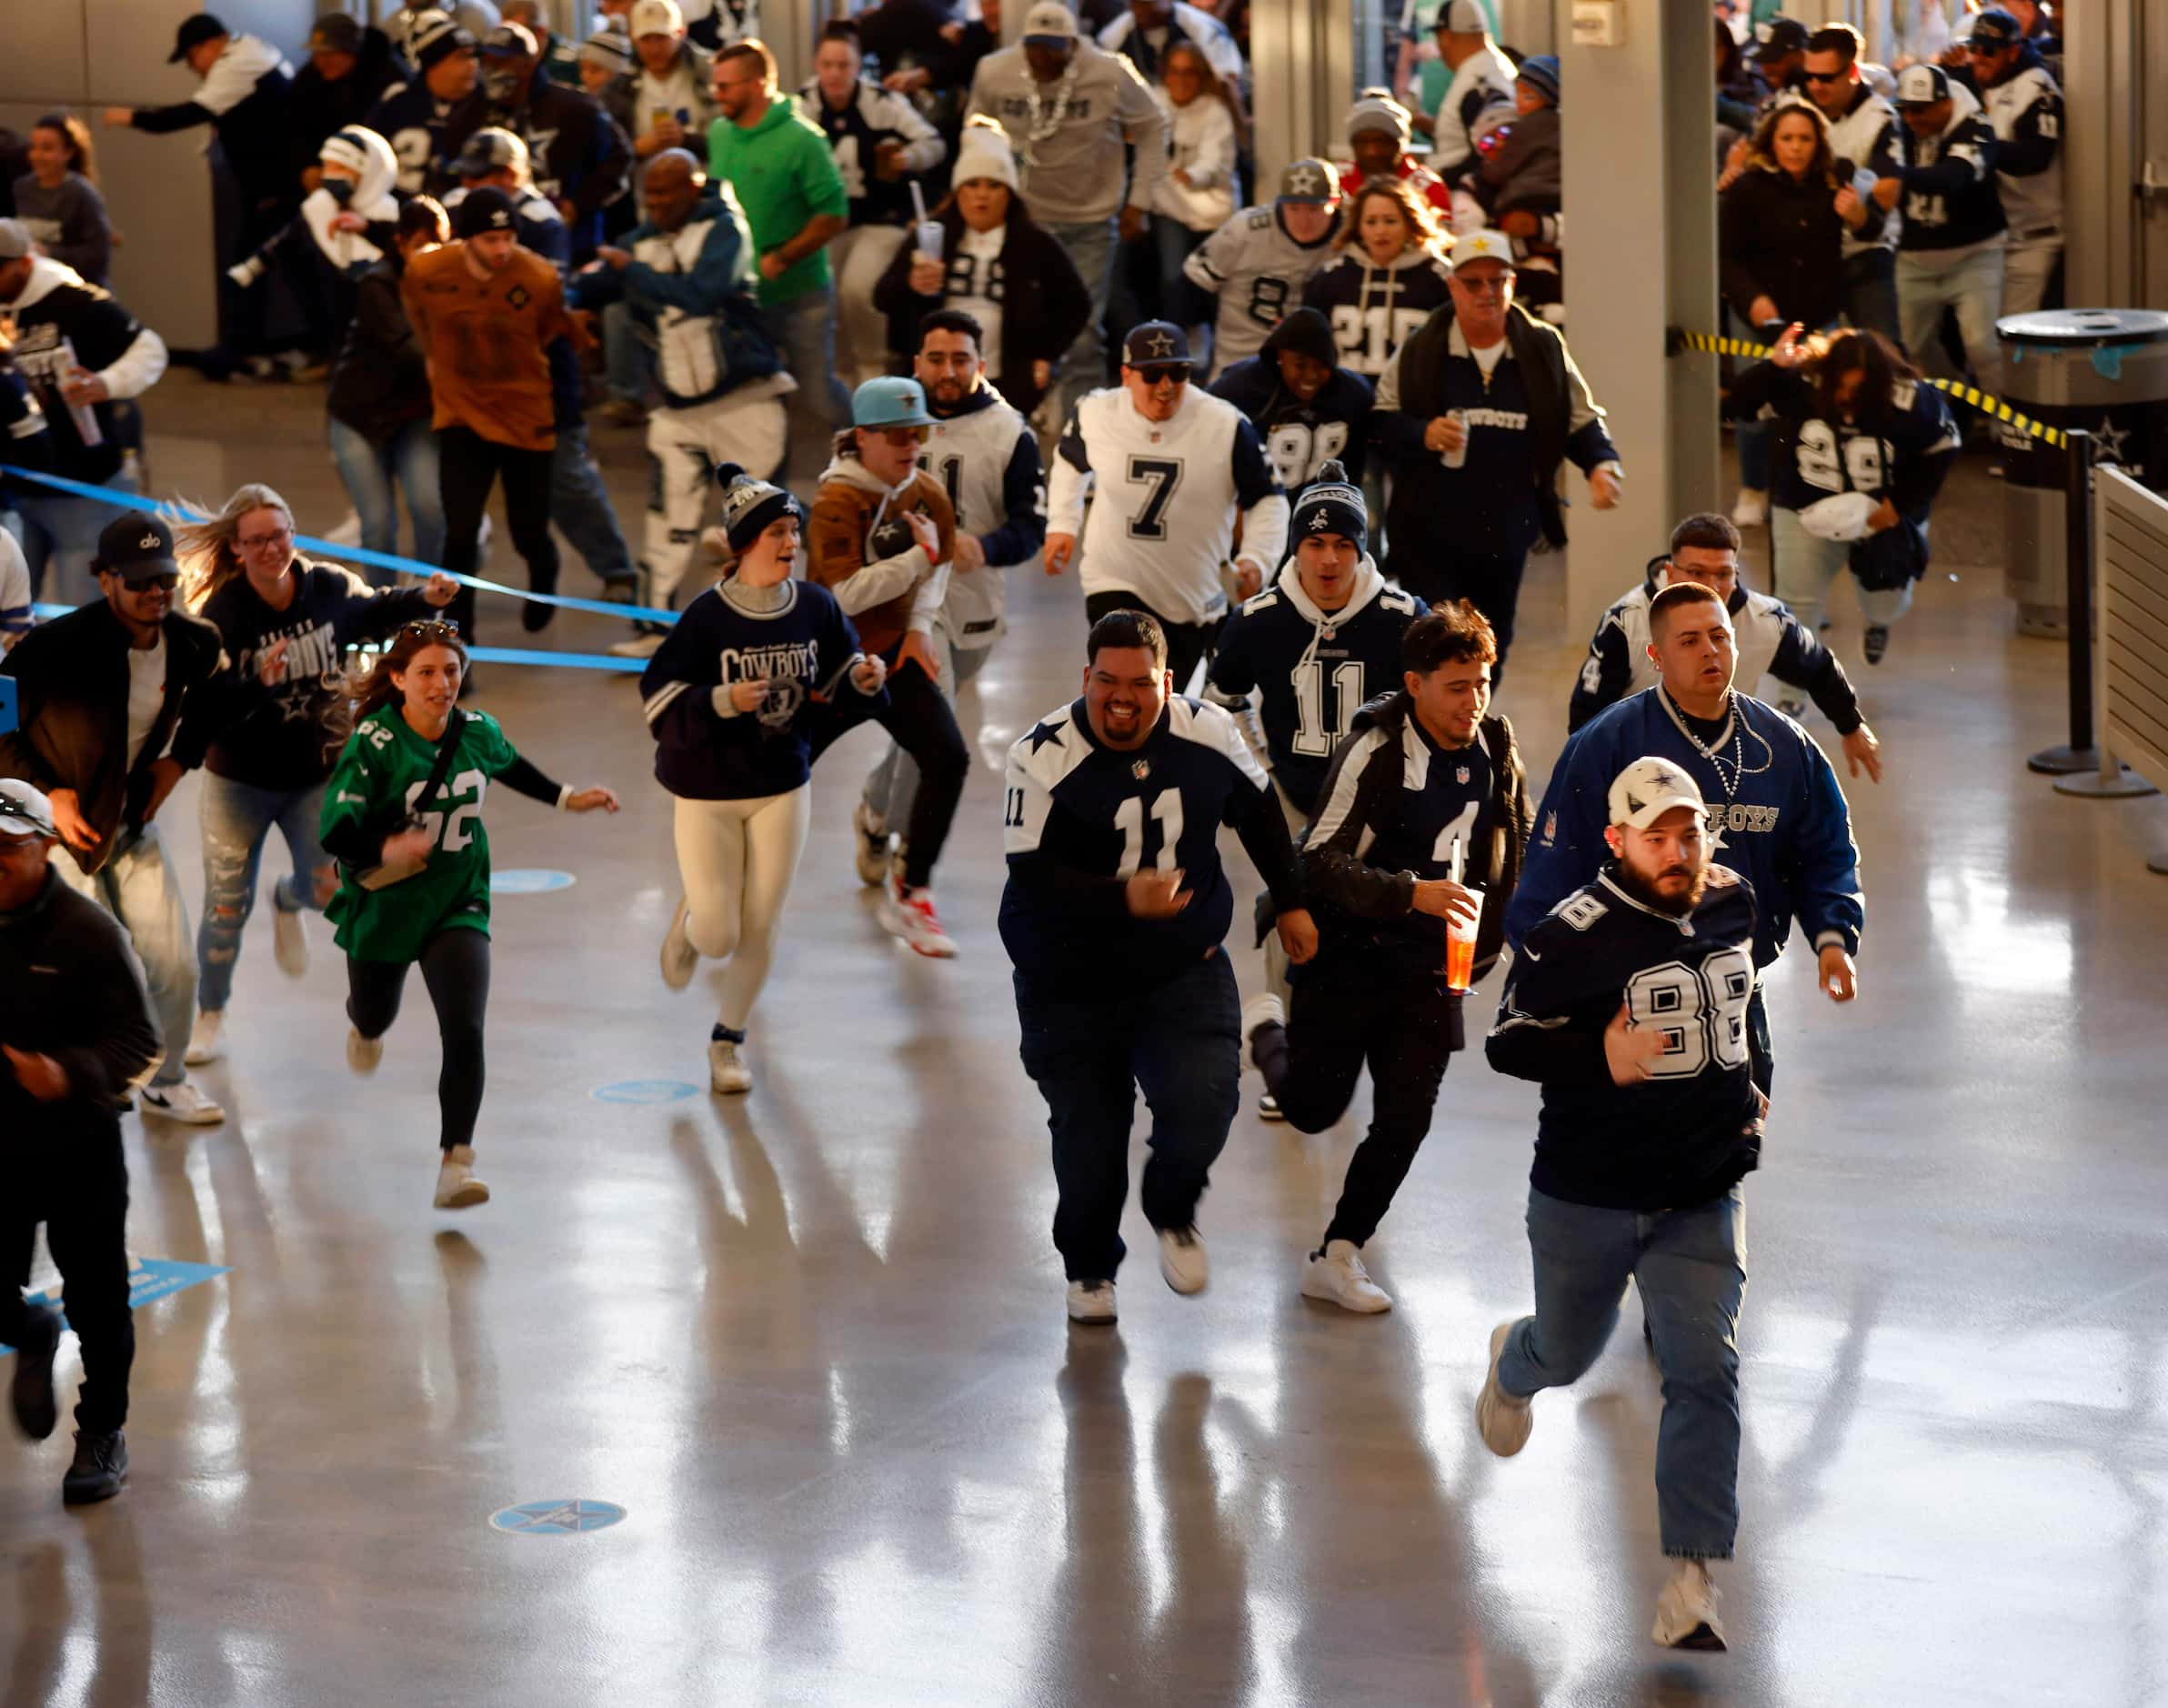 As the doors opened at 5pm, Dallas Cowboys and Philadelphia Eagles fans race to the stairs...